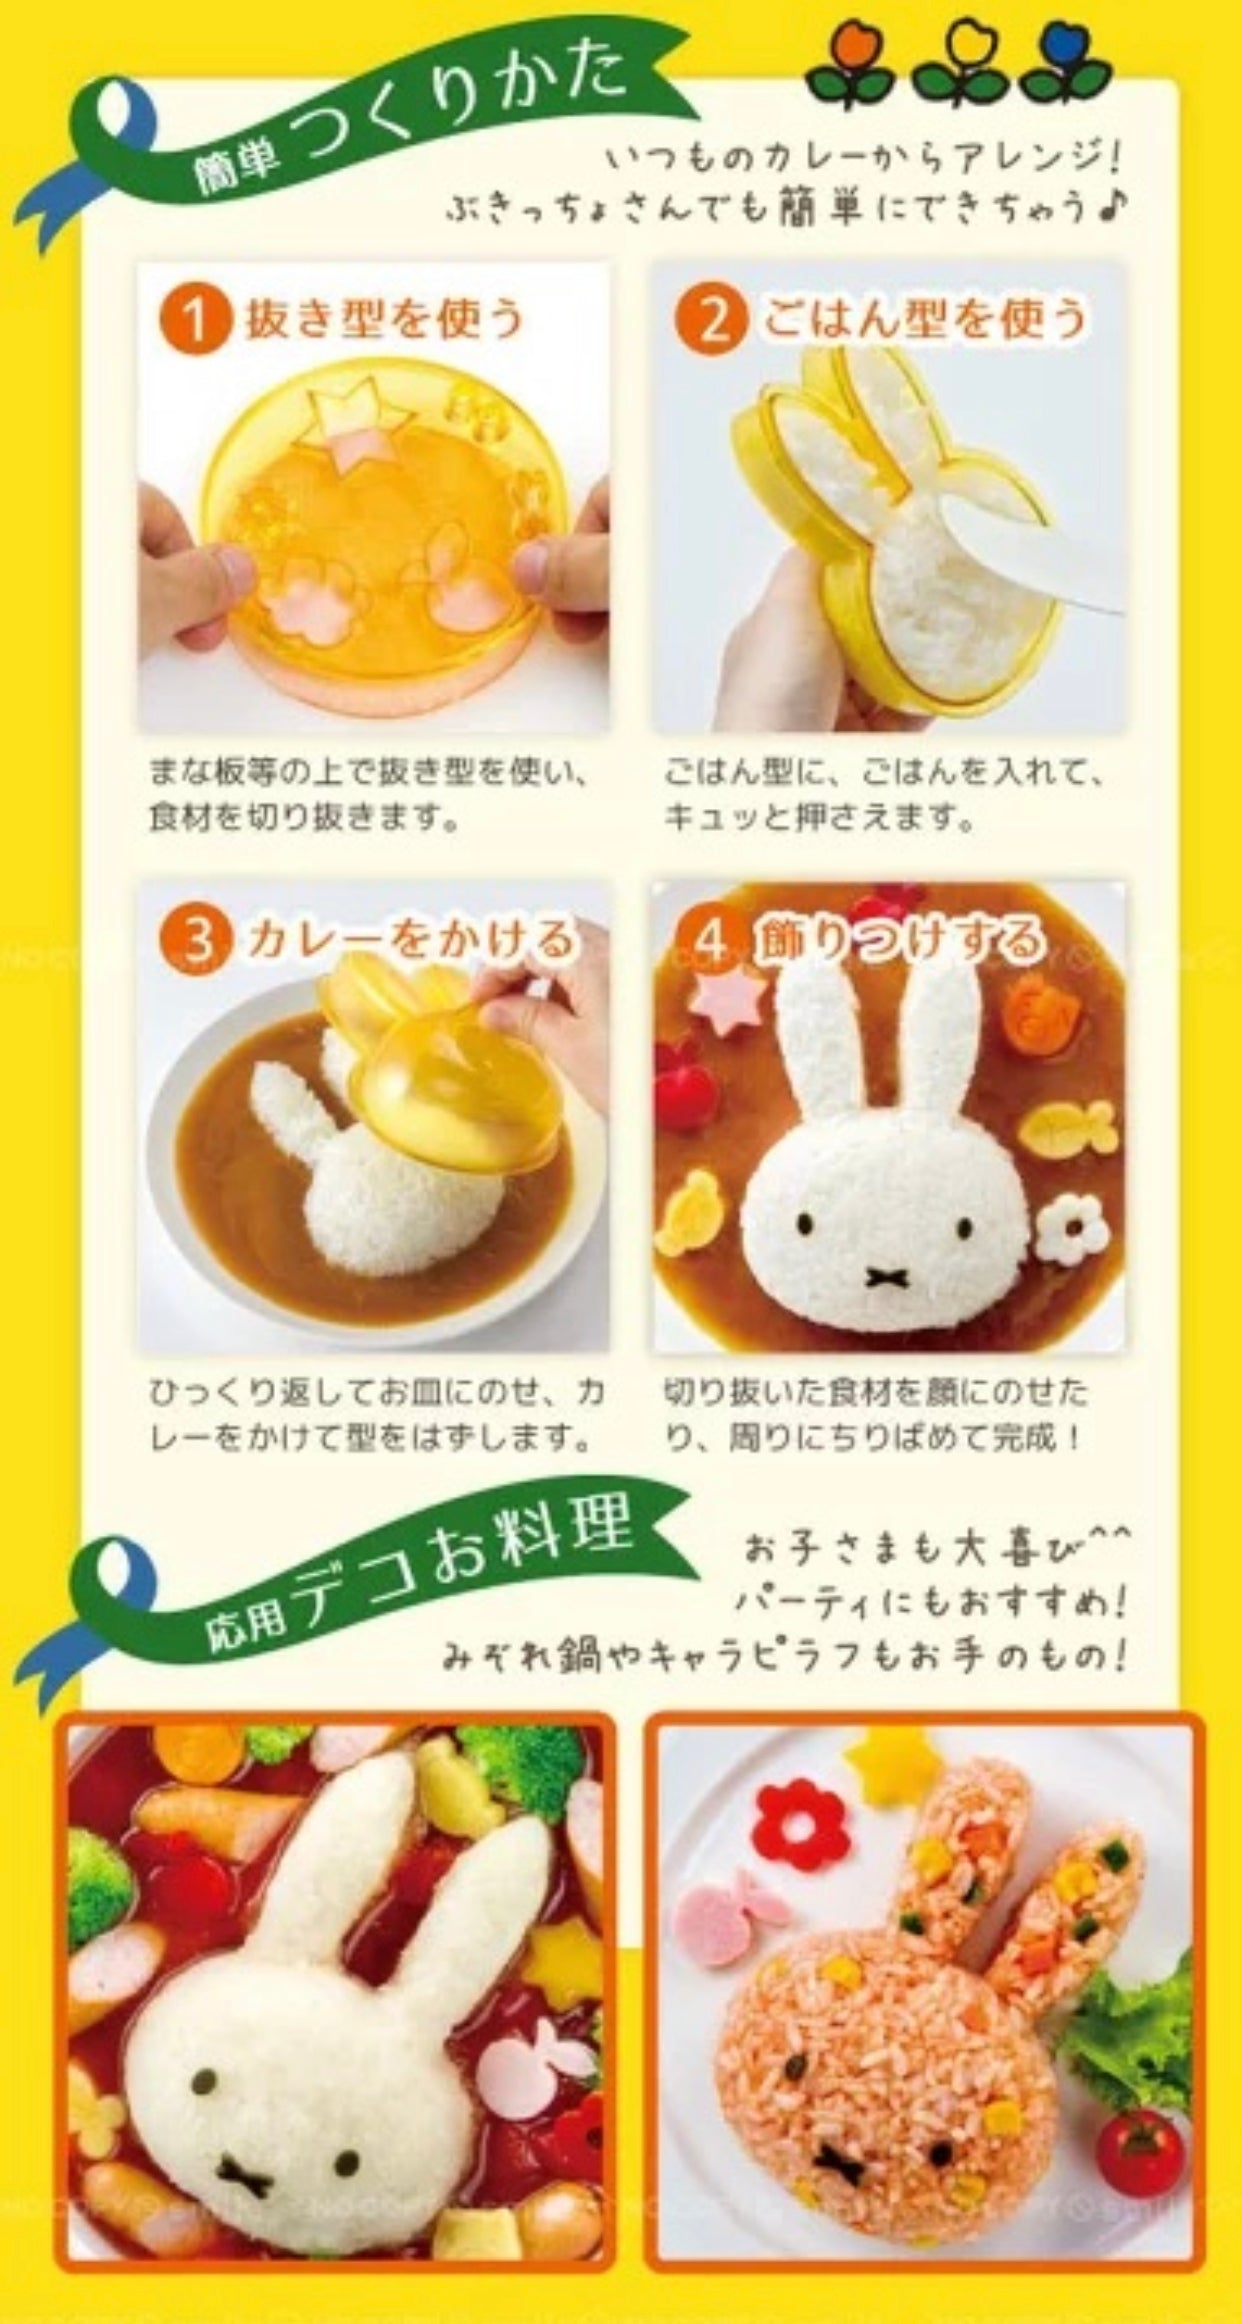 Miffy Rice Mold and Cutter Kit